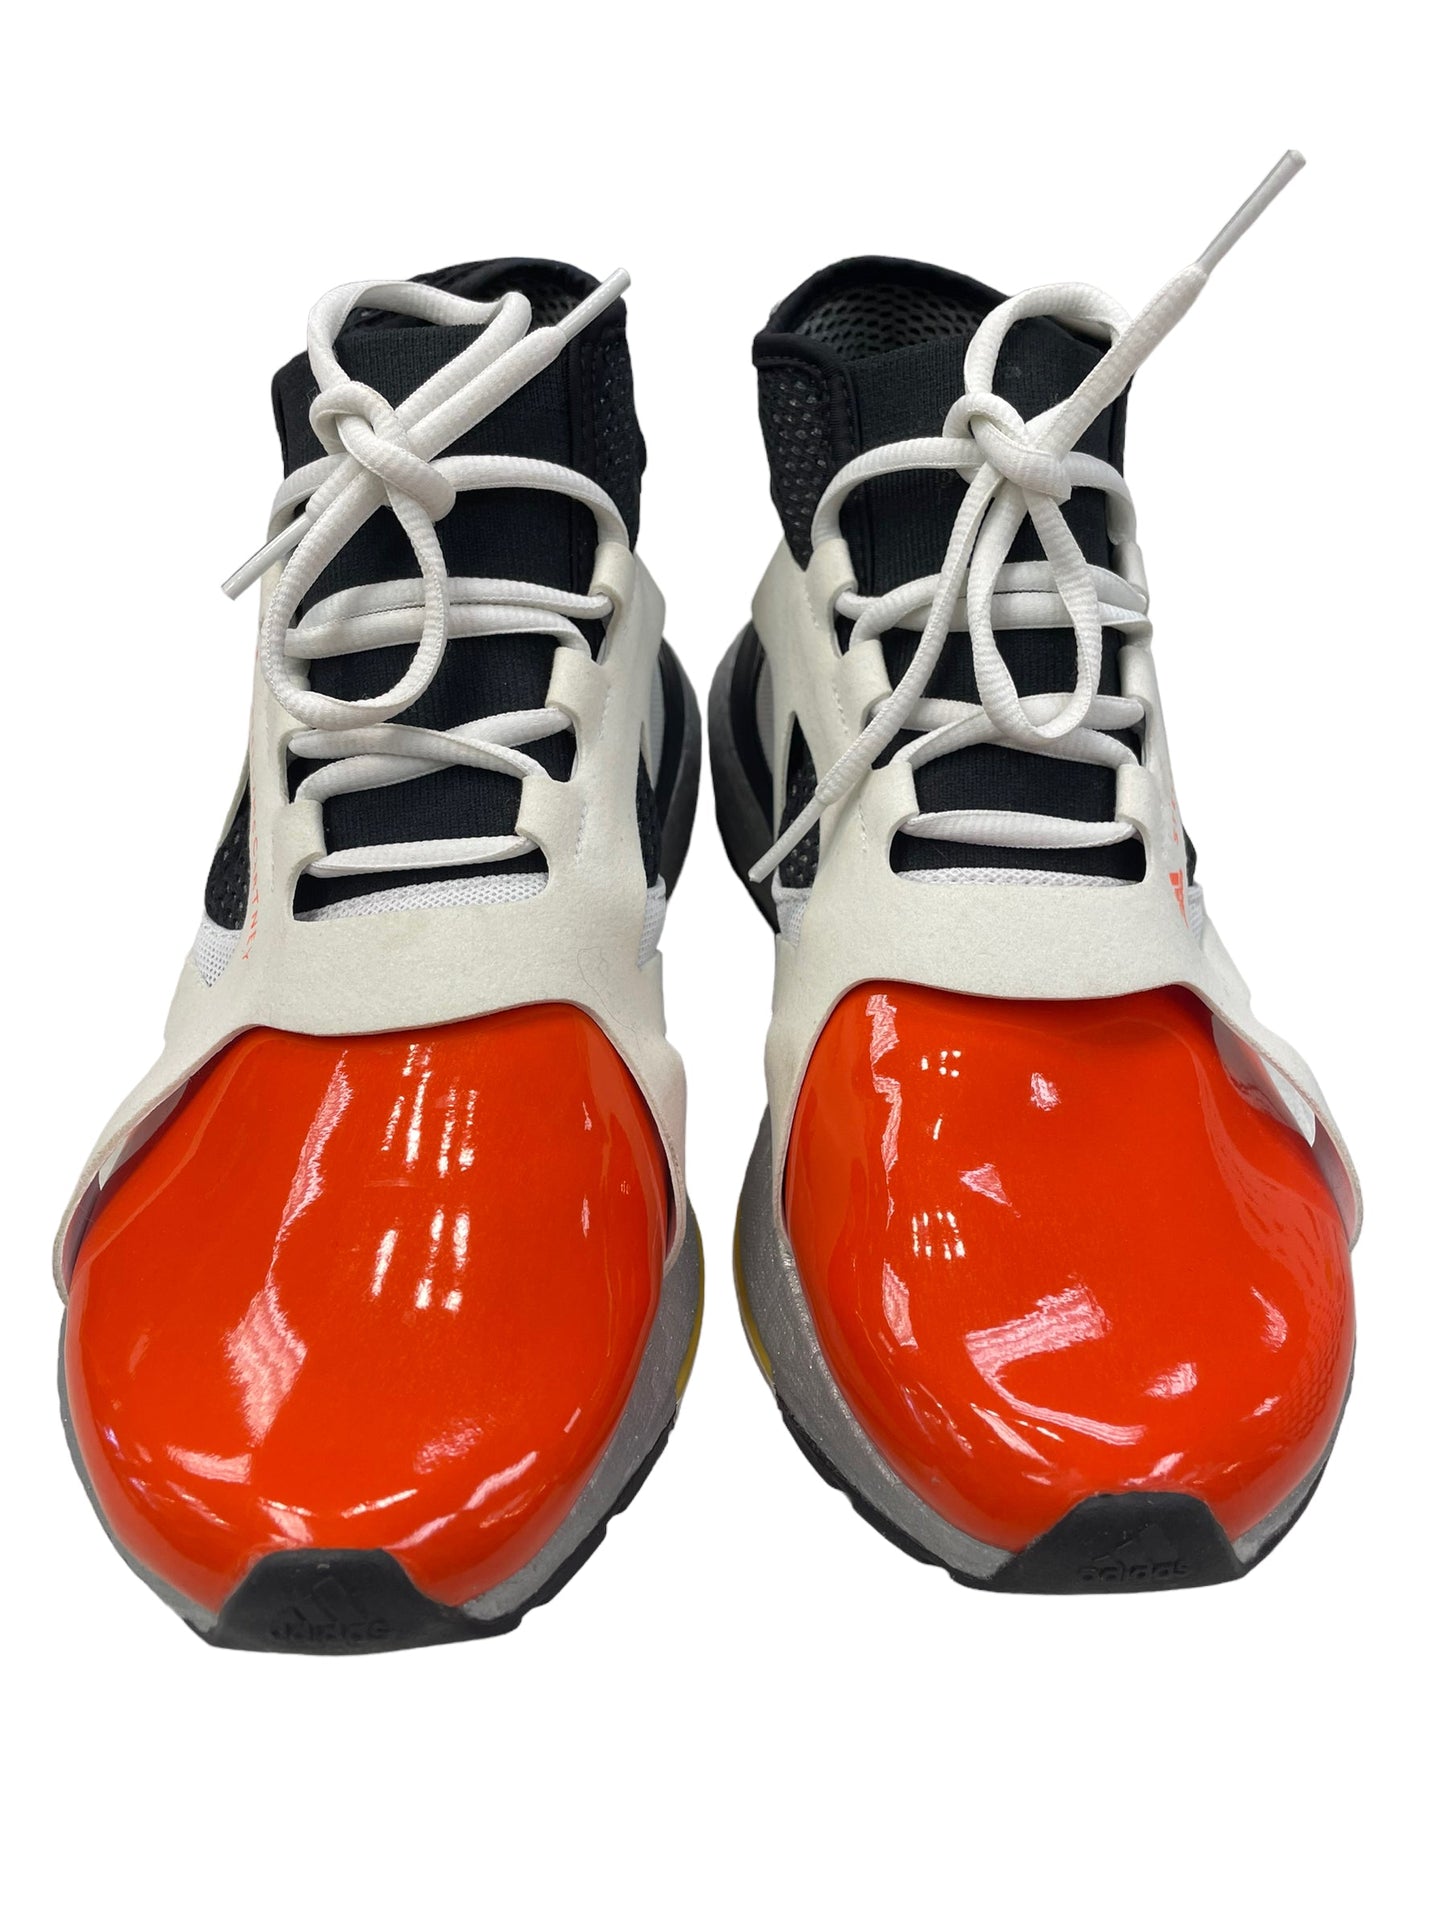 Shoes Sneakers By Stella Mccartney  Size: 8.5